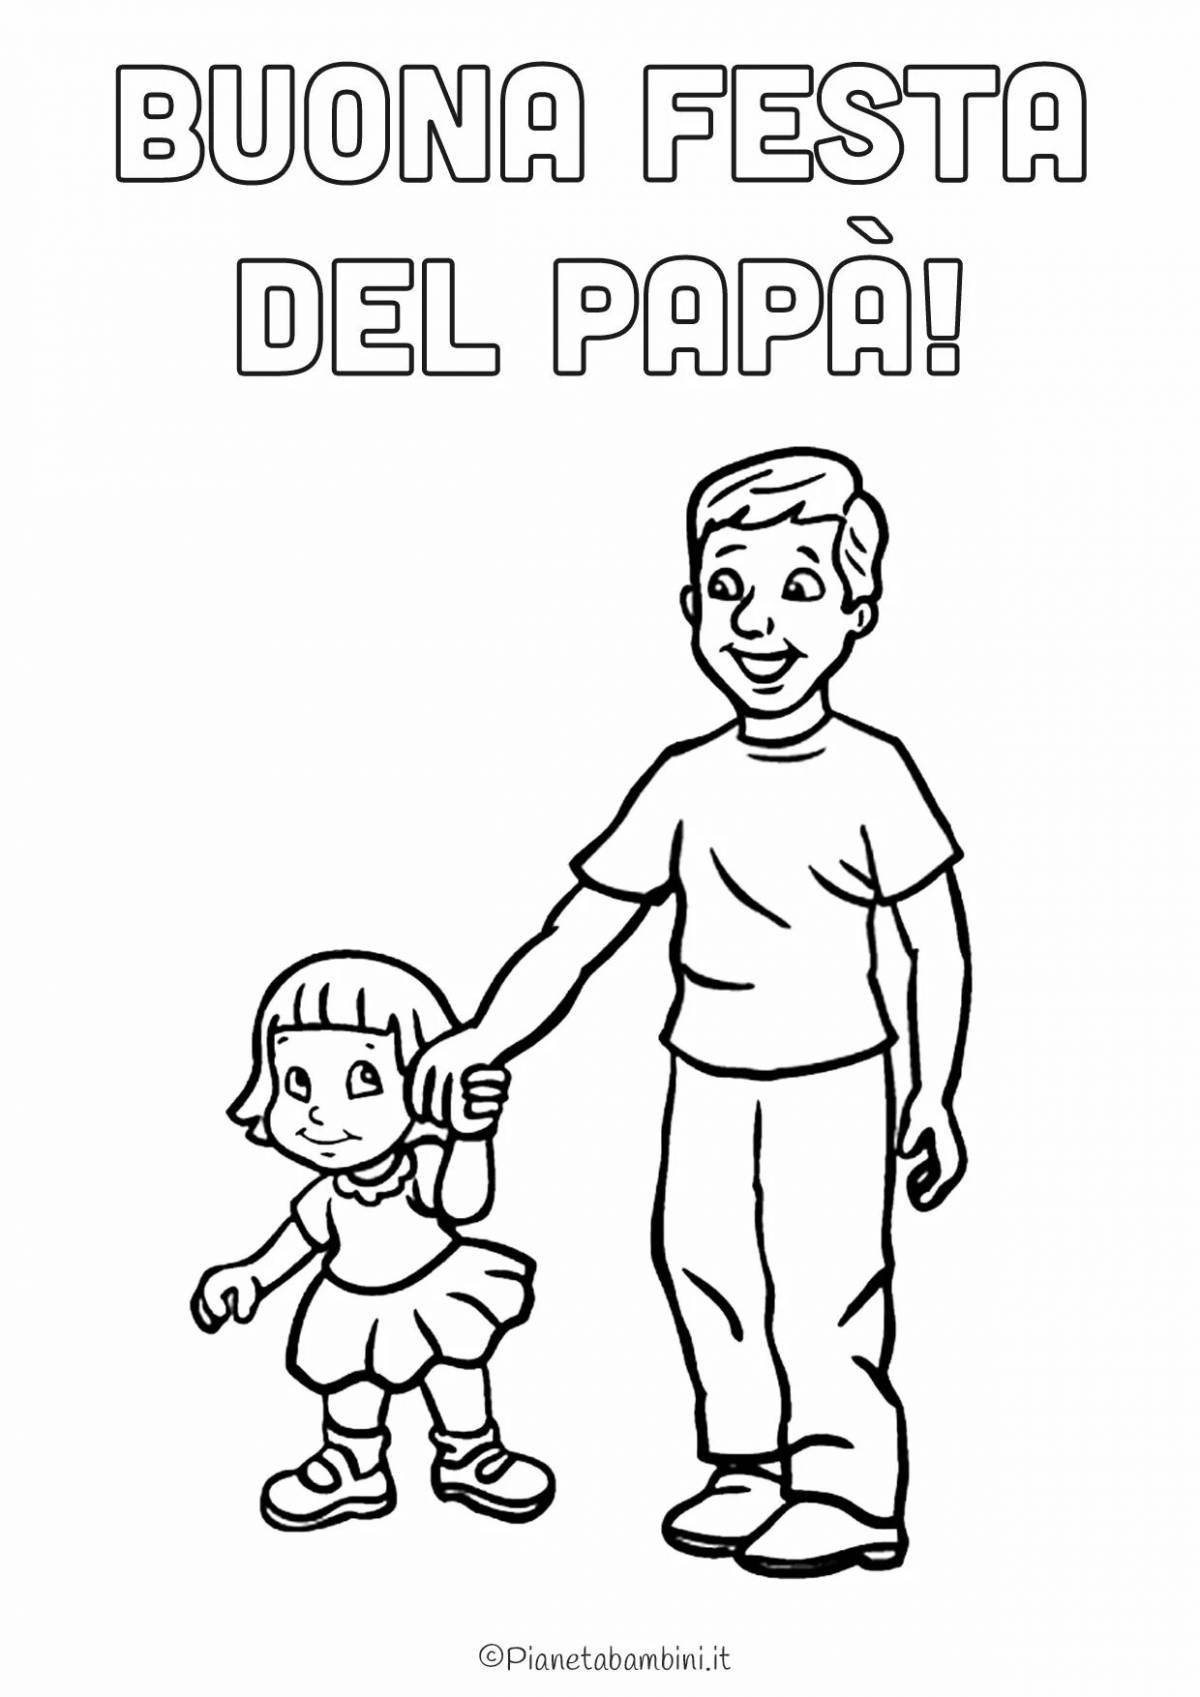 Fun coloring book for dad for dad's day